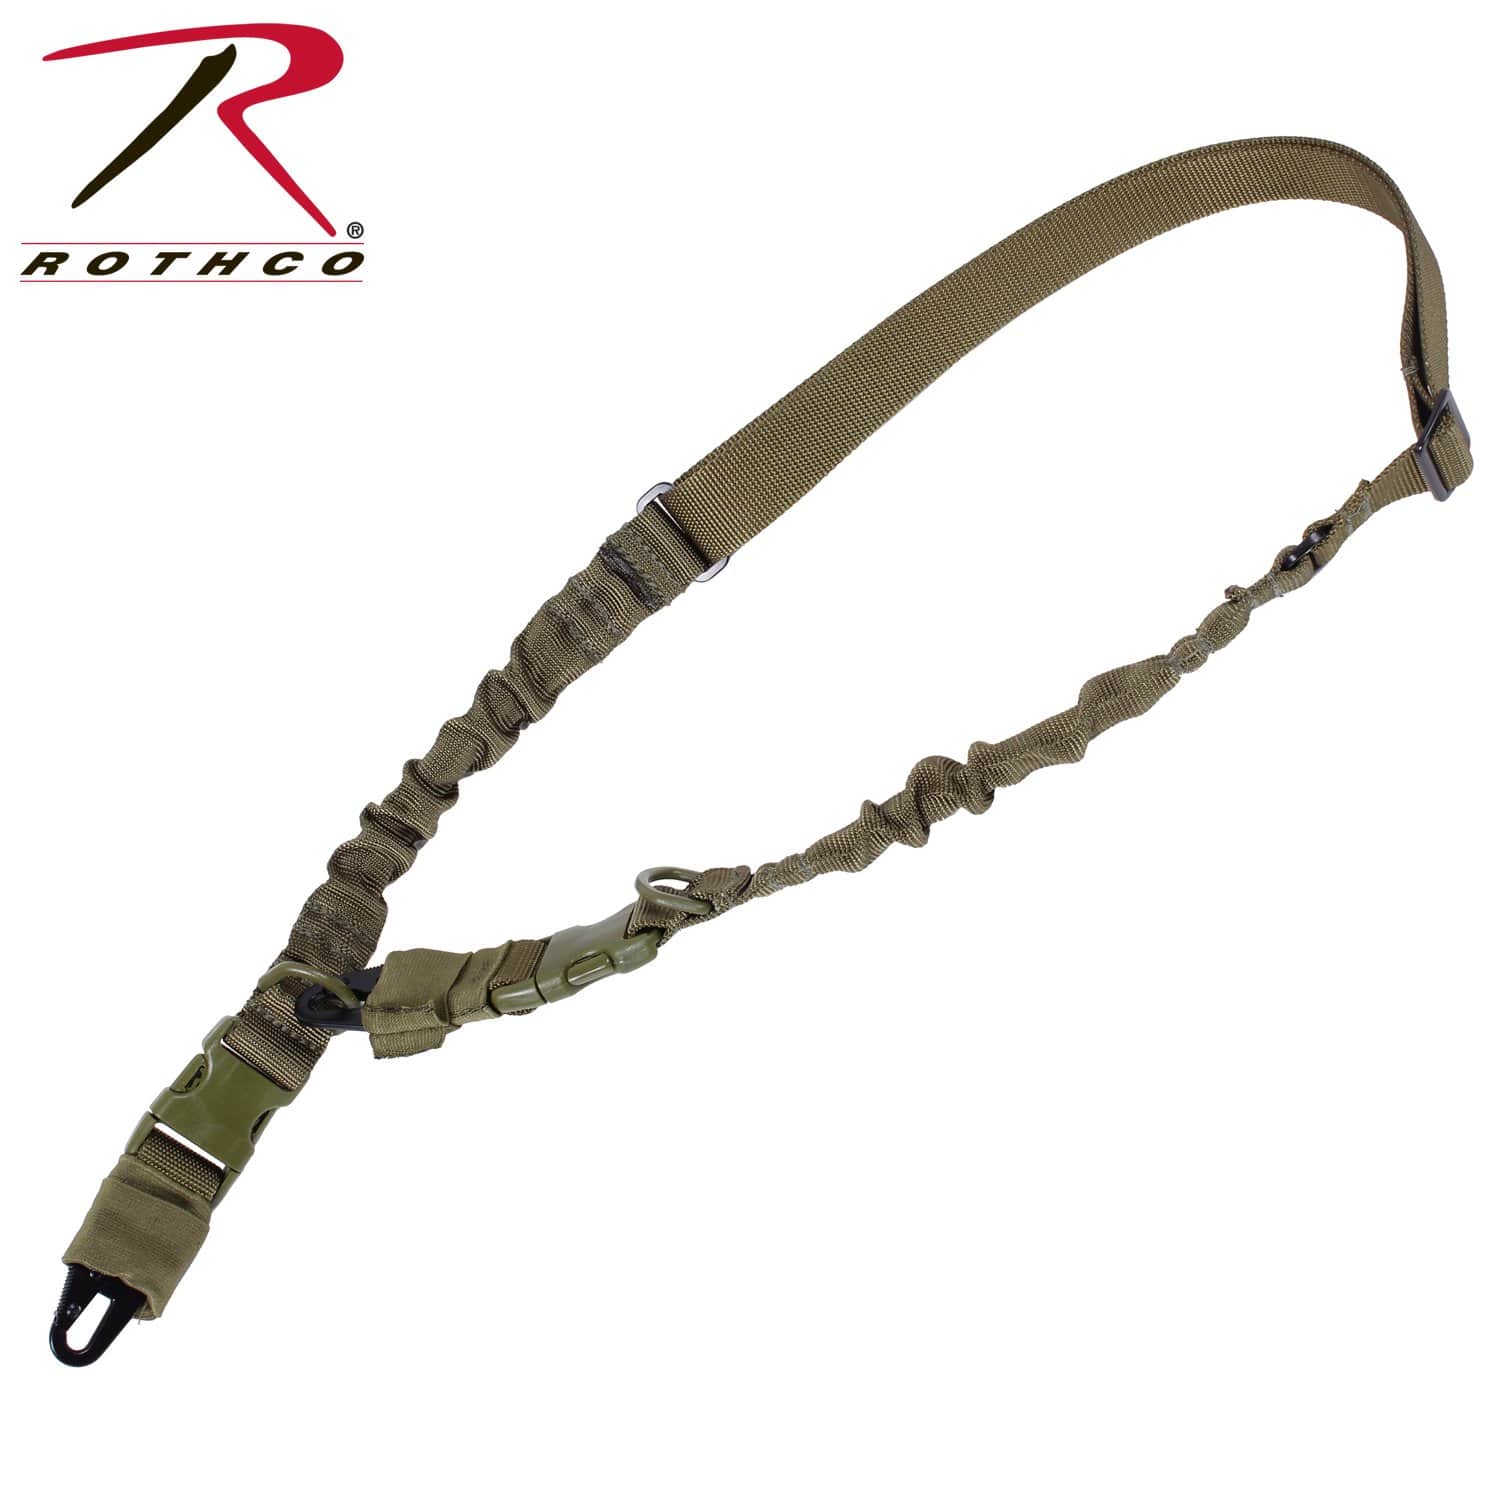 Rothco 2-Point Tactical Sling - Olive Drab - Eminent Paintball And Airsoft